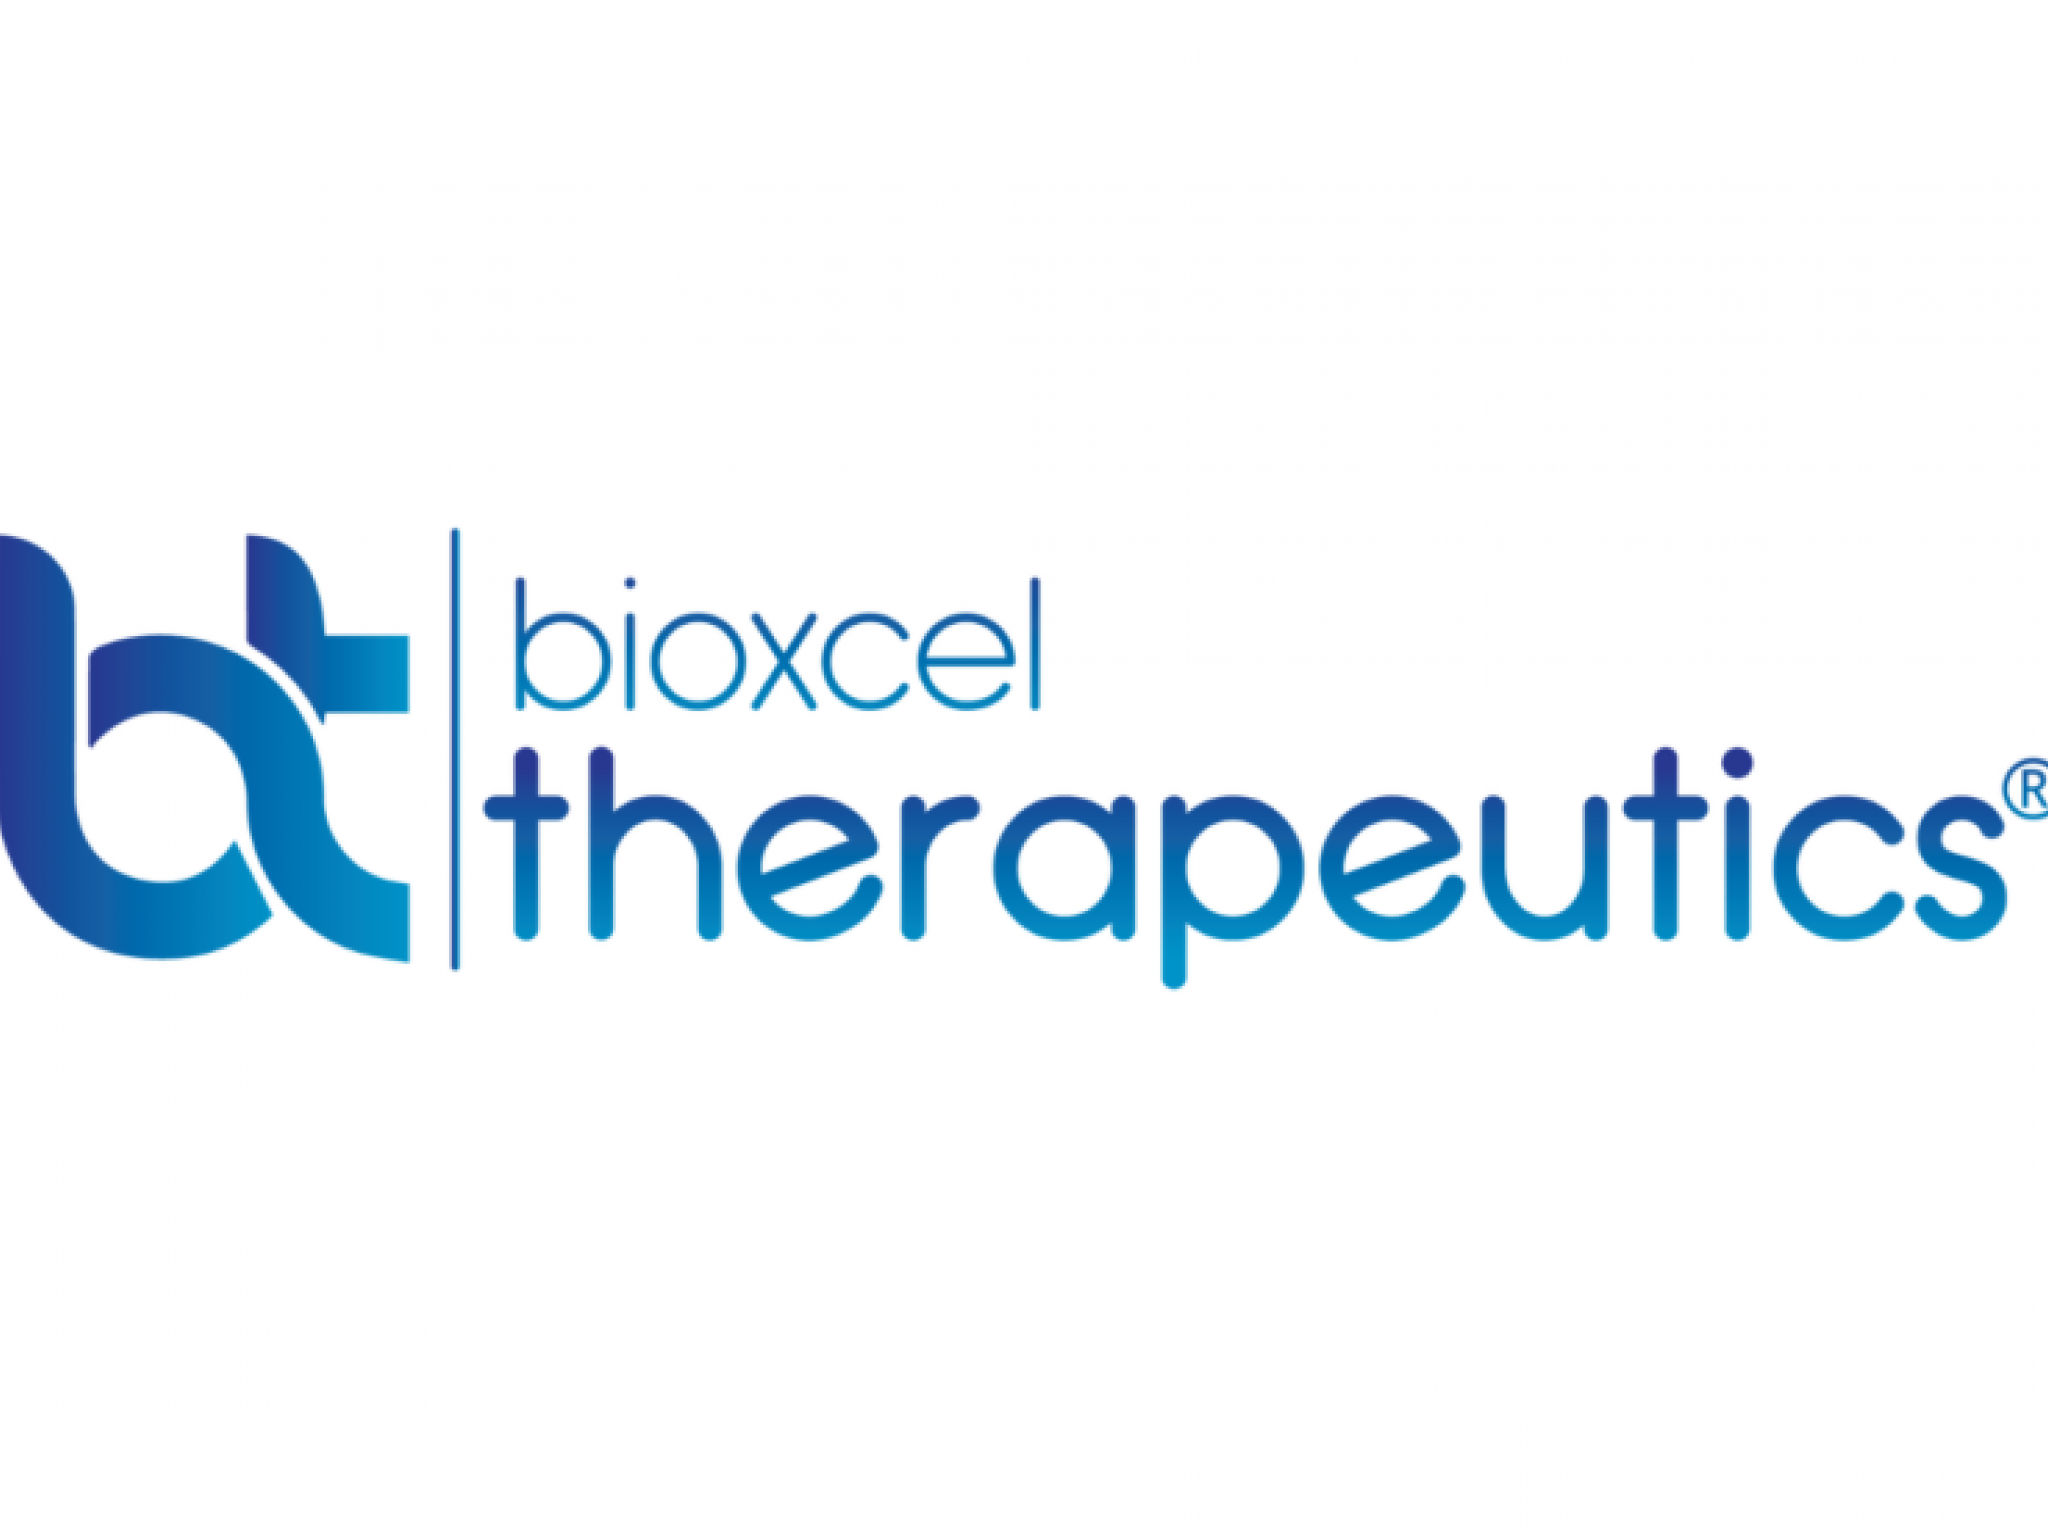  why-bioxcel-therapeutics-shares-are-rising-tuesday 